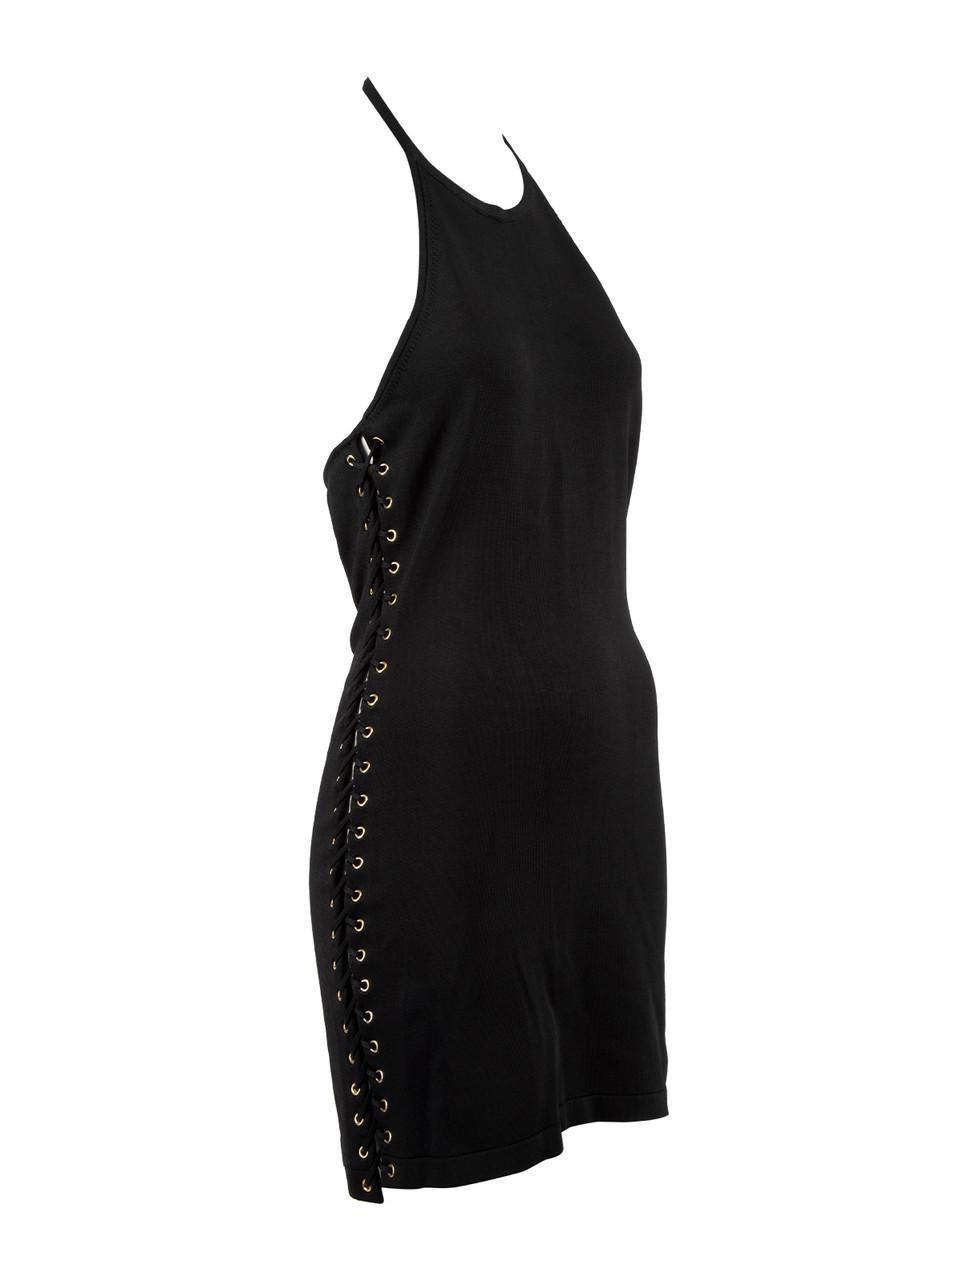 CONDITION is Very good. Hardly any visible wear to dress is evident apart for few tiny pulls to thread on this used Balmain designer resale item. Details Black Viscose Halter dress Figure hugging Sleeveless Halter neck Lace up detail on sides Back